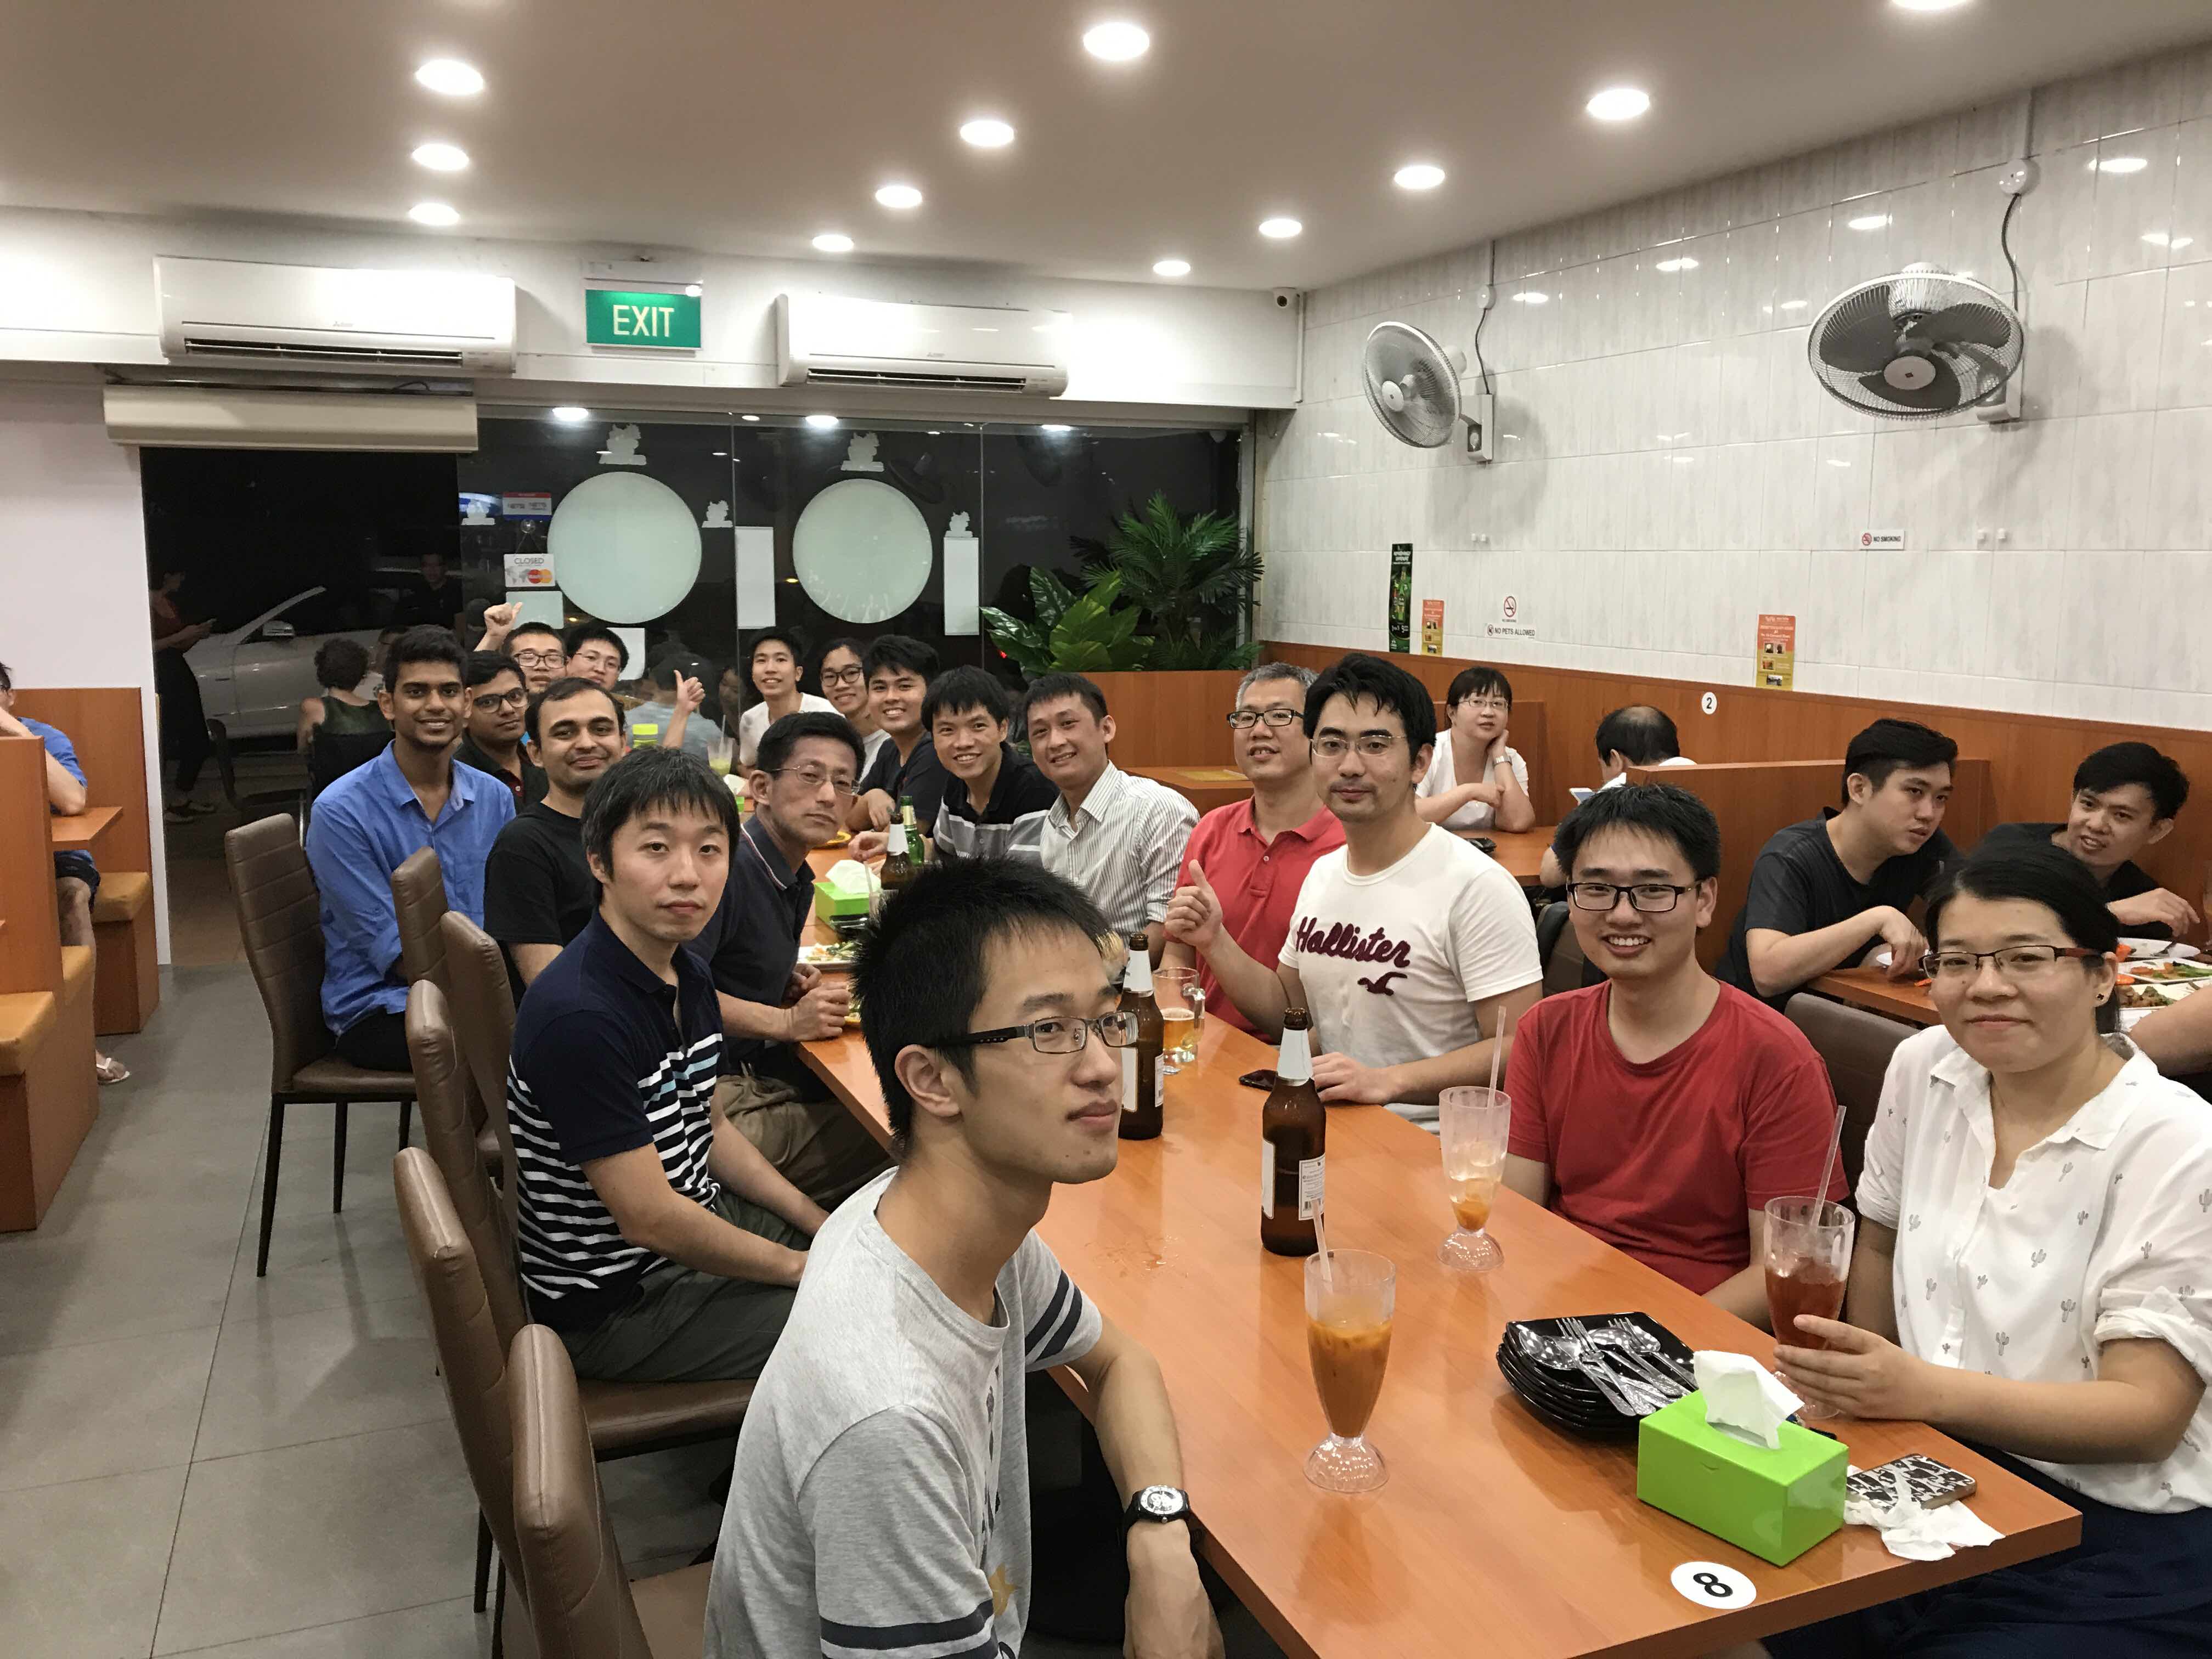 <b>Joint party for Kaz and CS 6101 Deep Learning for Vision</b>